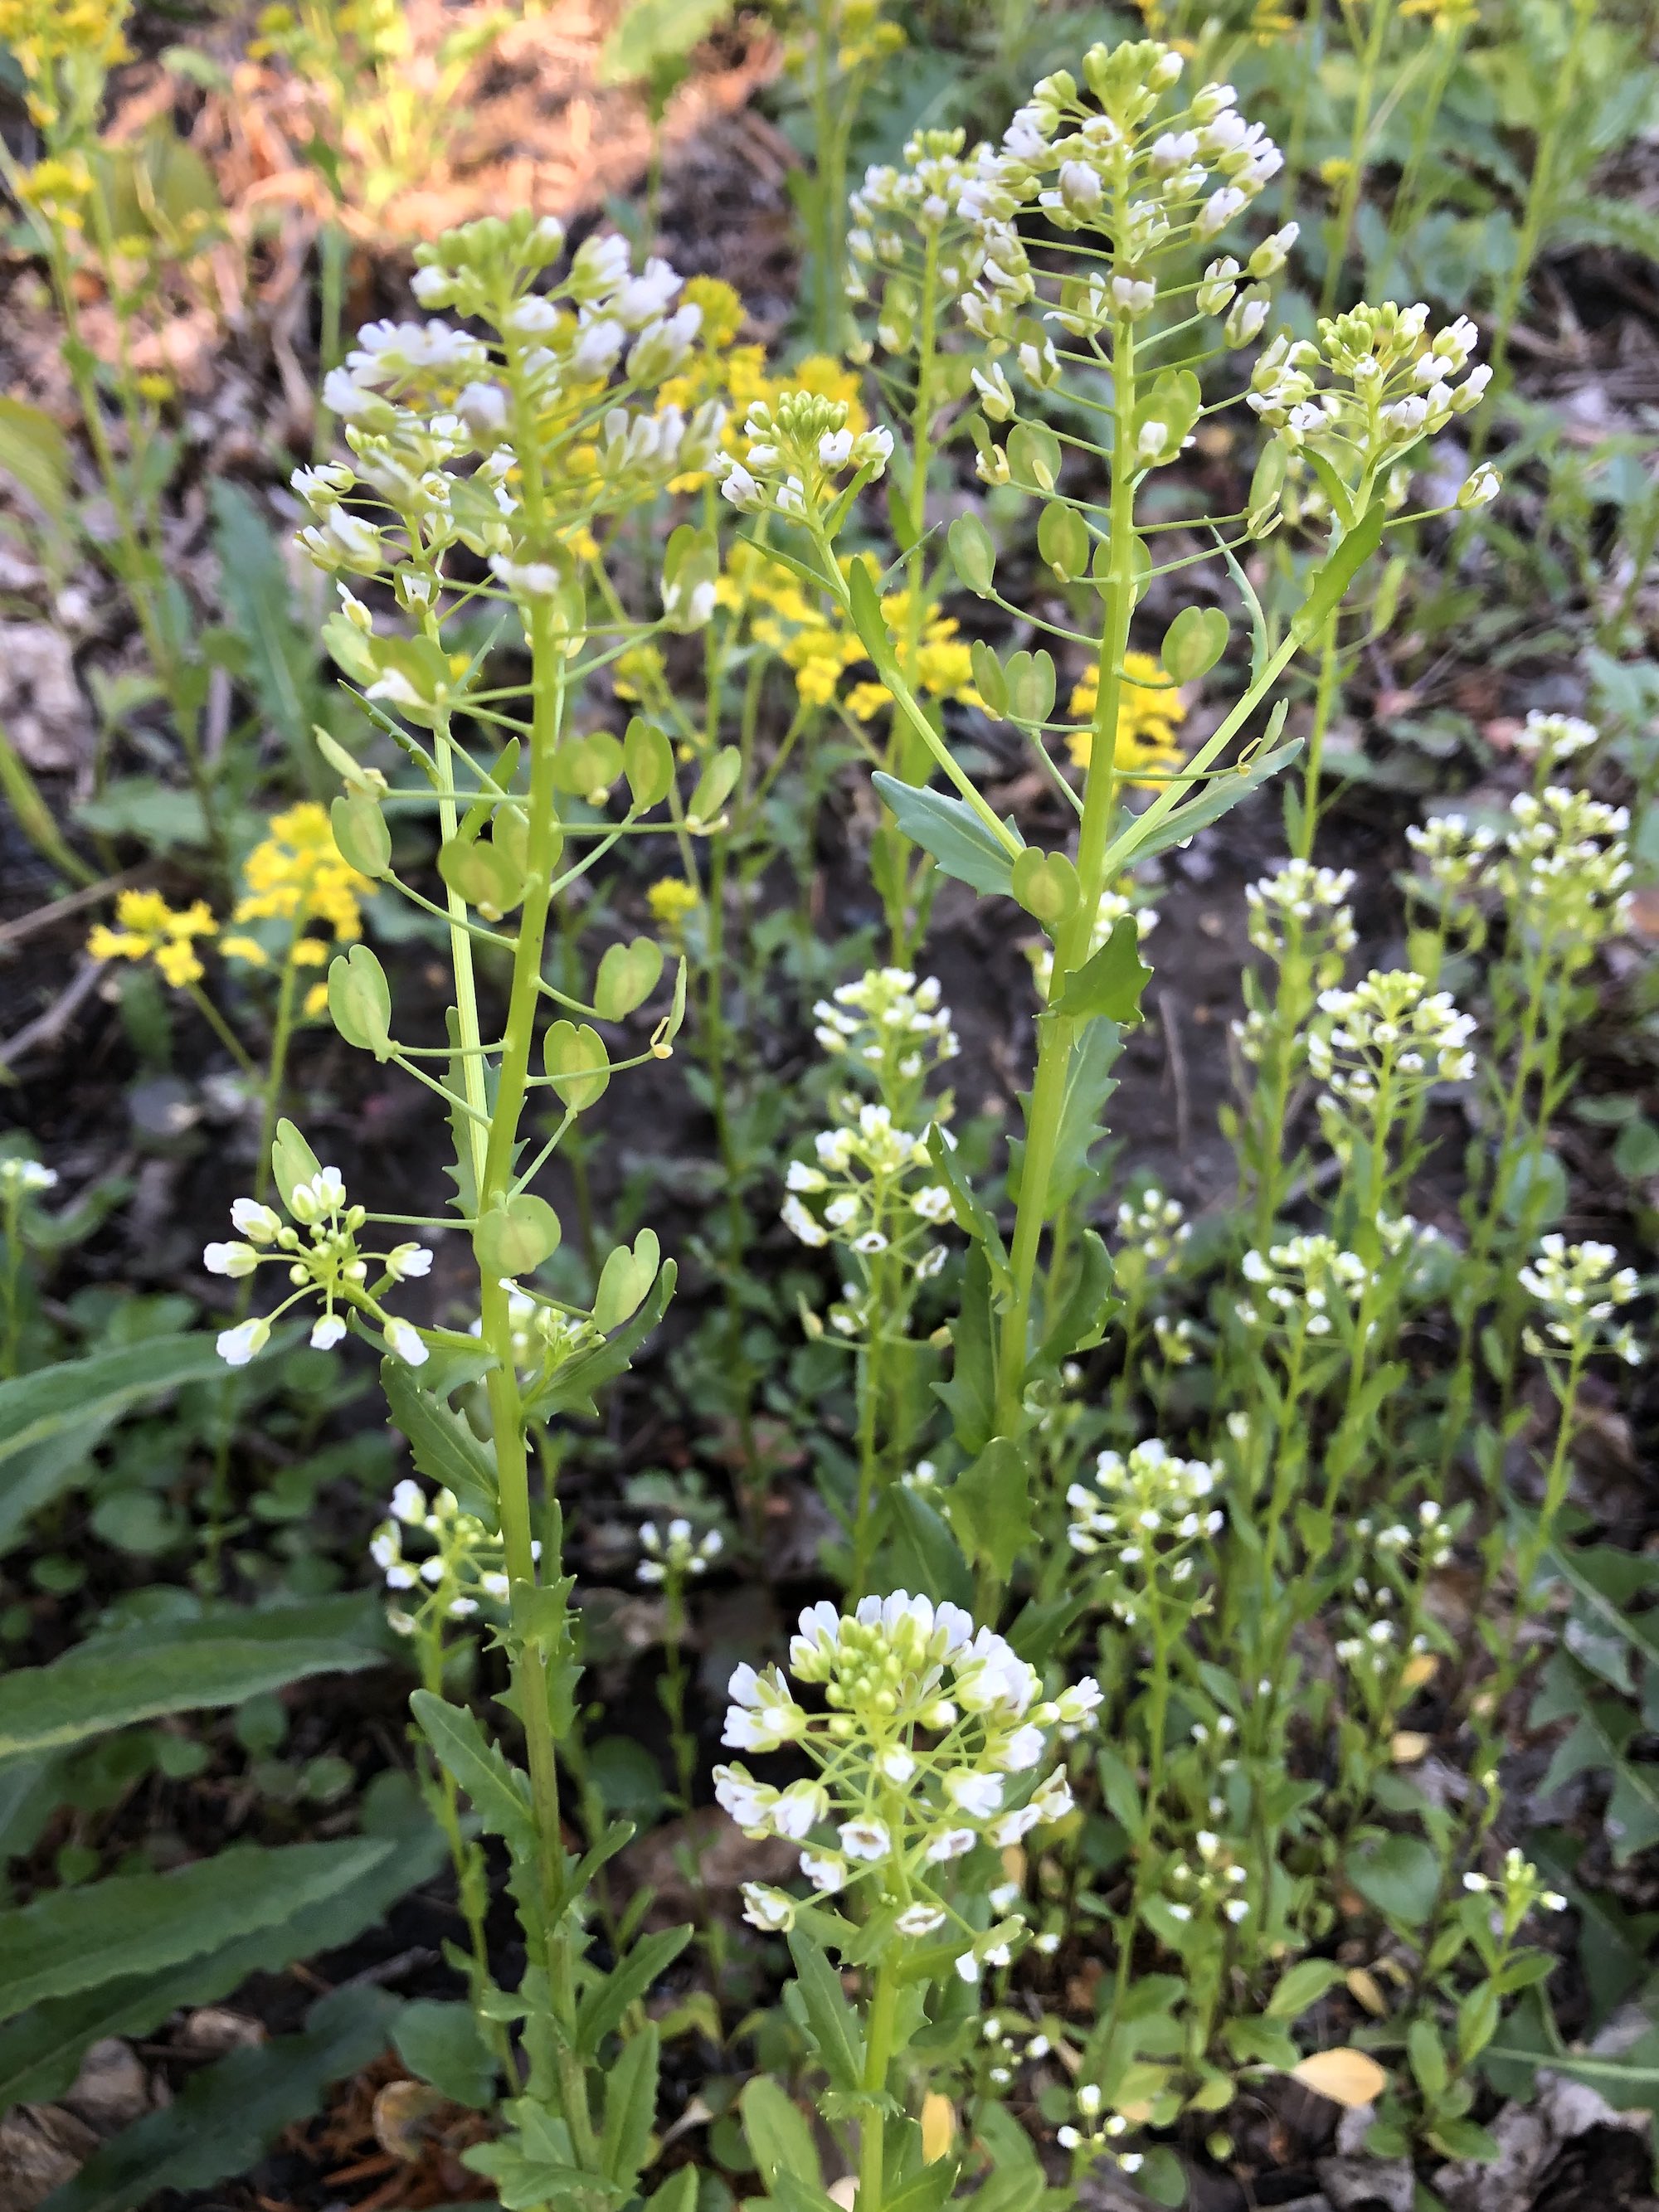 Field Pennycress next to Oak Savanna parking lot in Madison, Wisconsin on April 7, 2021.